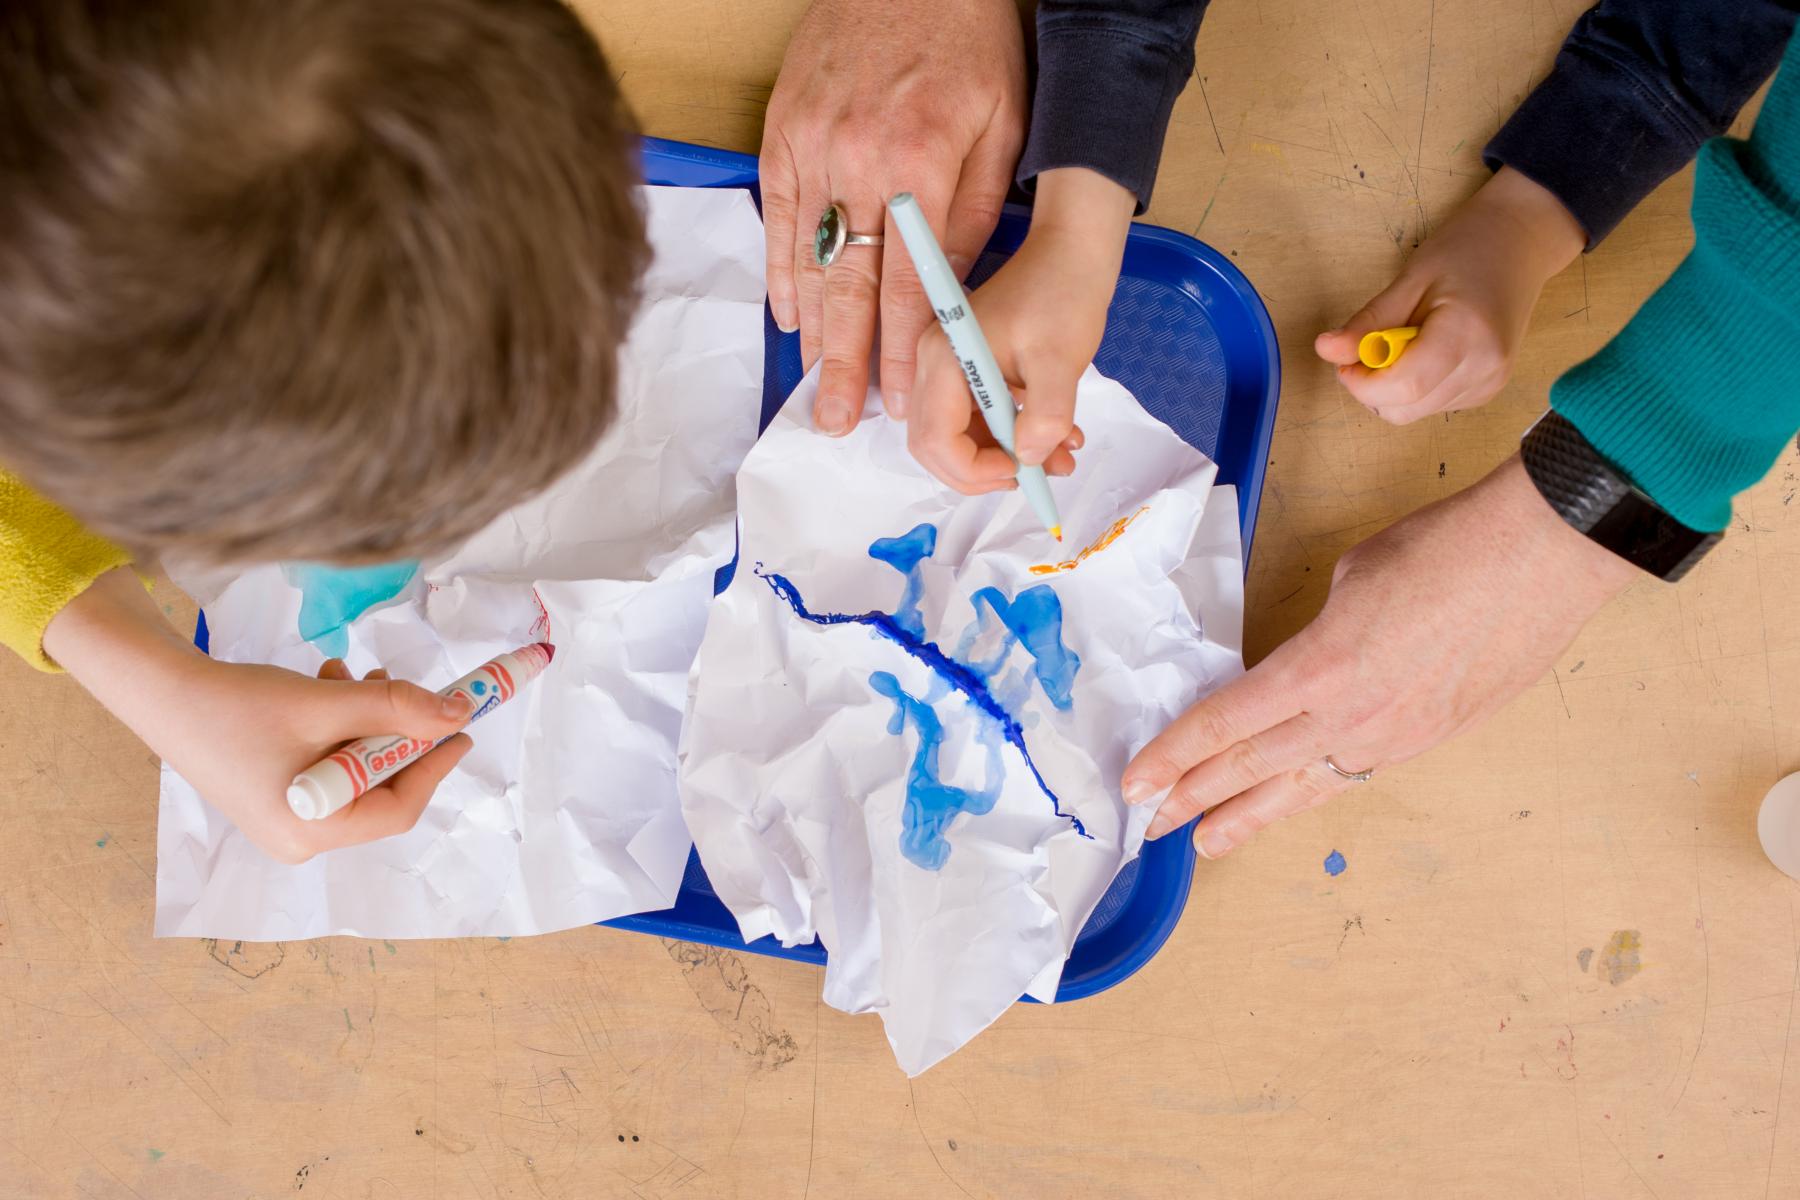 Children color on crumpled paper